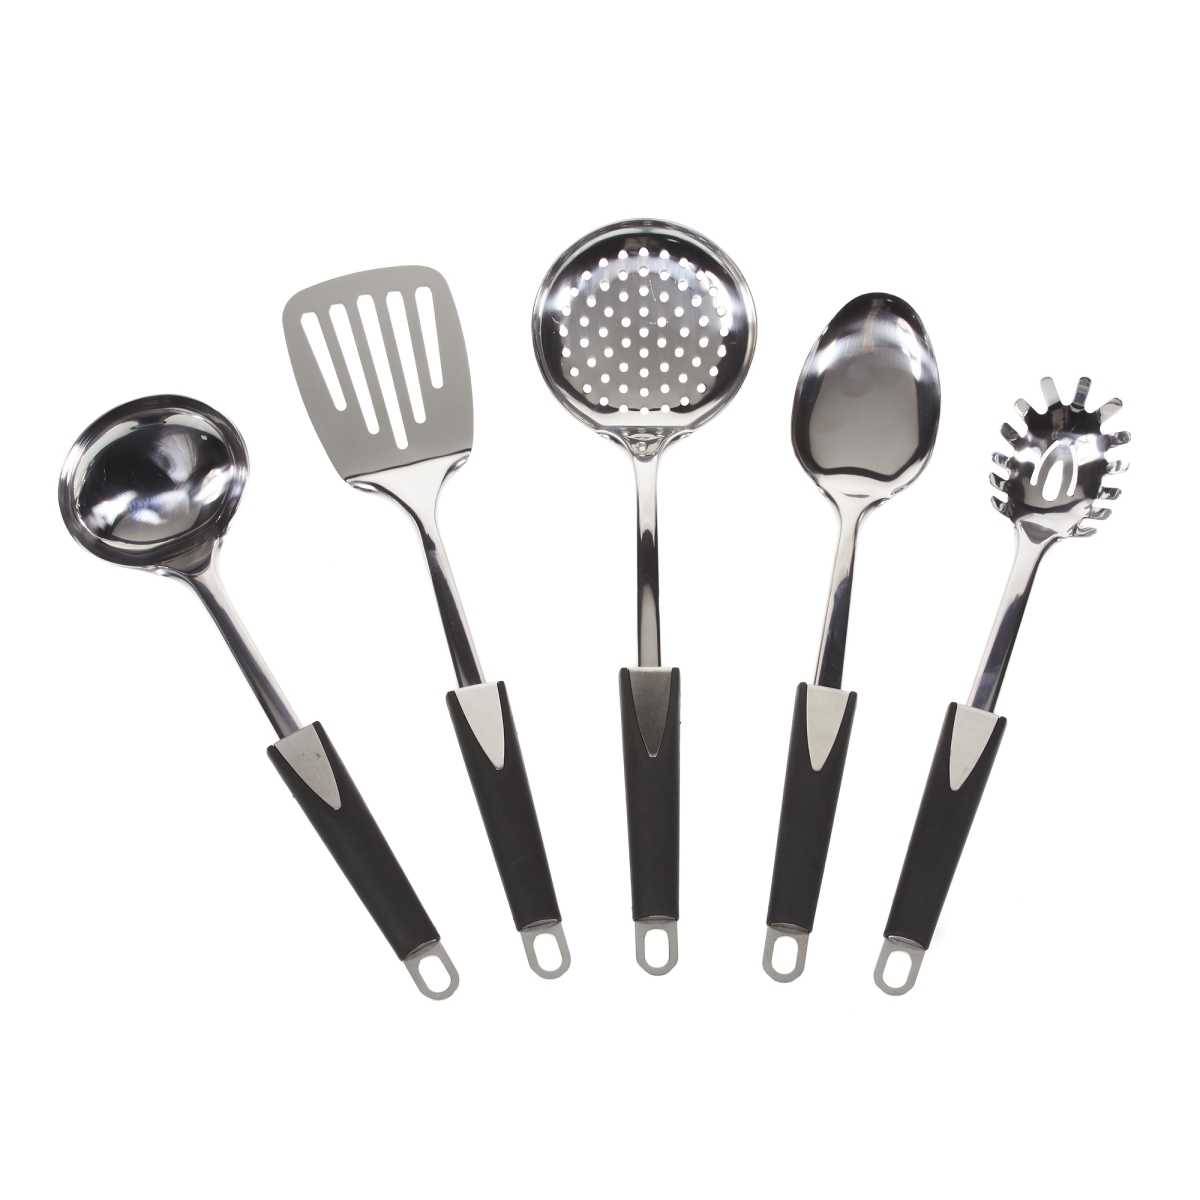 Gg-32603bk 5 Piece Stainless Steel Plus Soft Rubber Handle Tools Set - Black Handle